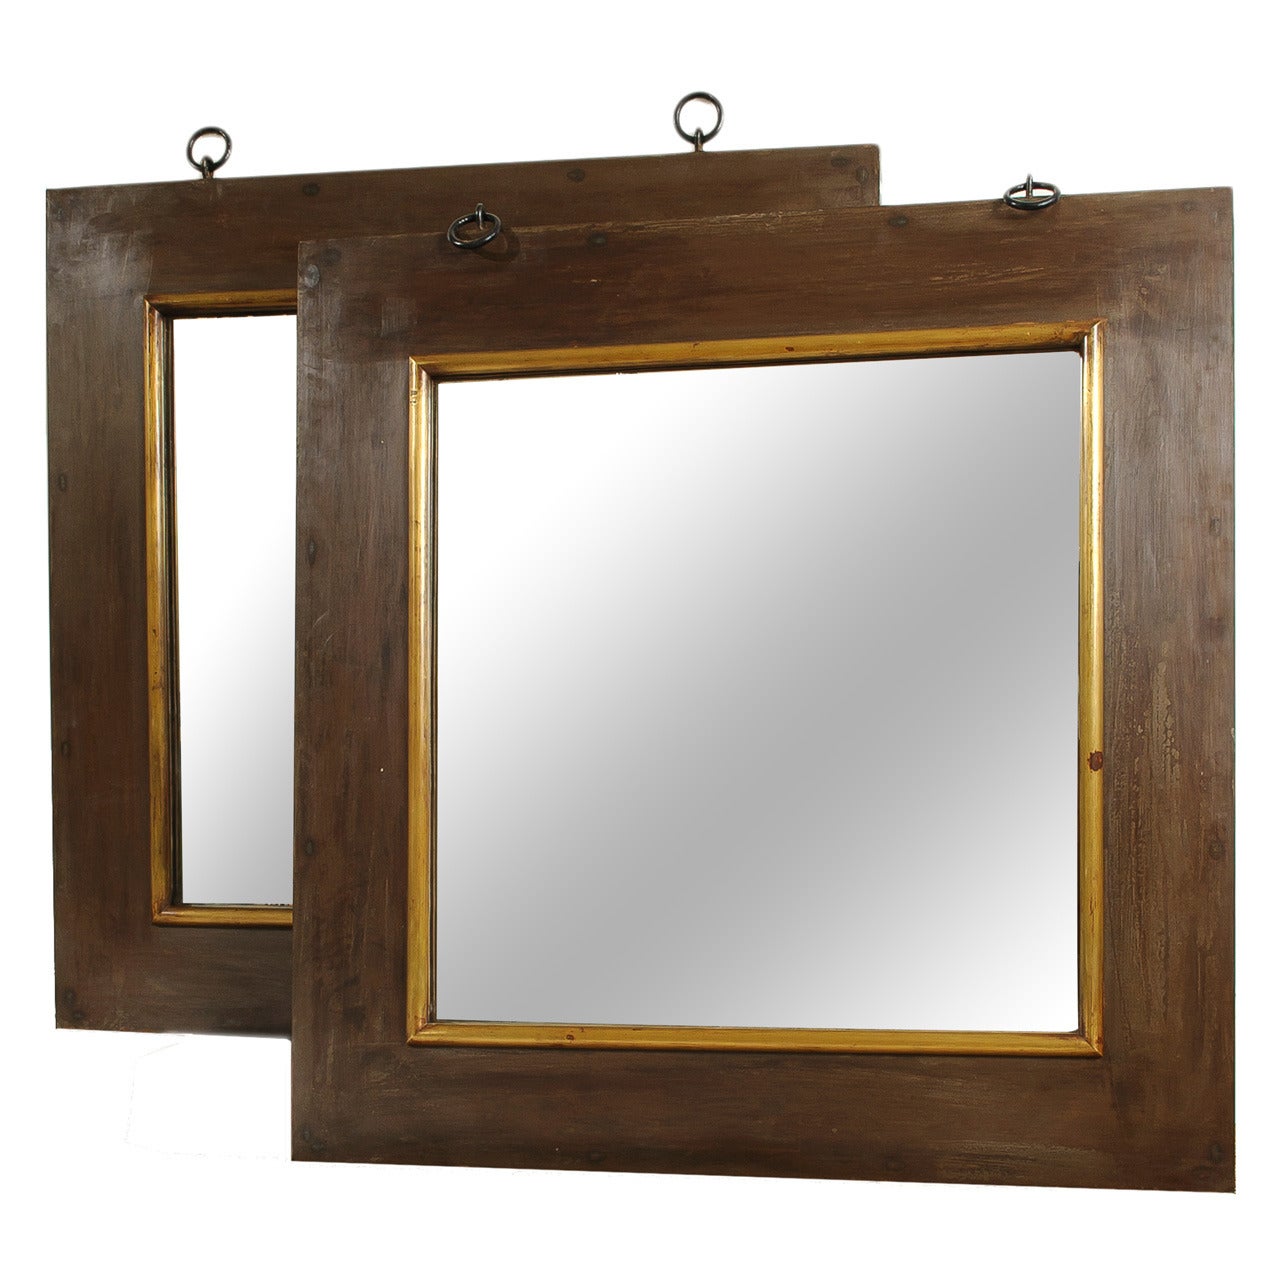 Pair of Grand Scale Wide Metal and Wood Framed Mirrors